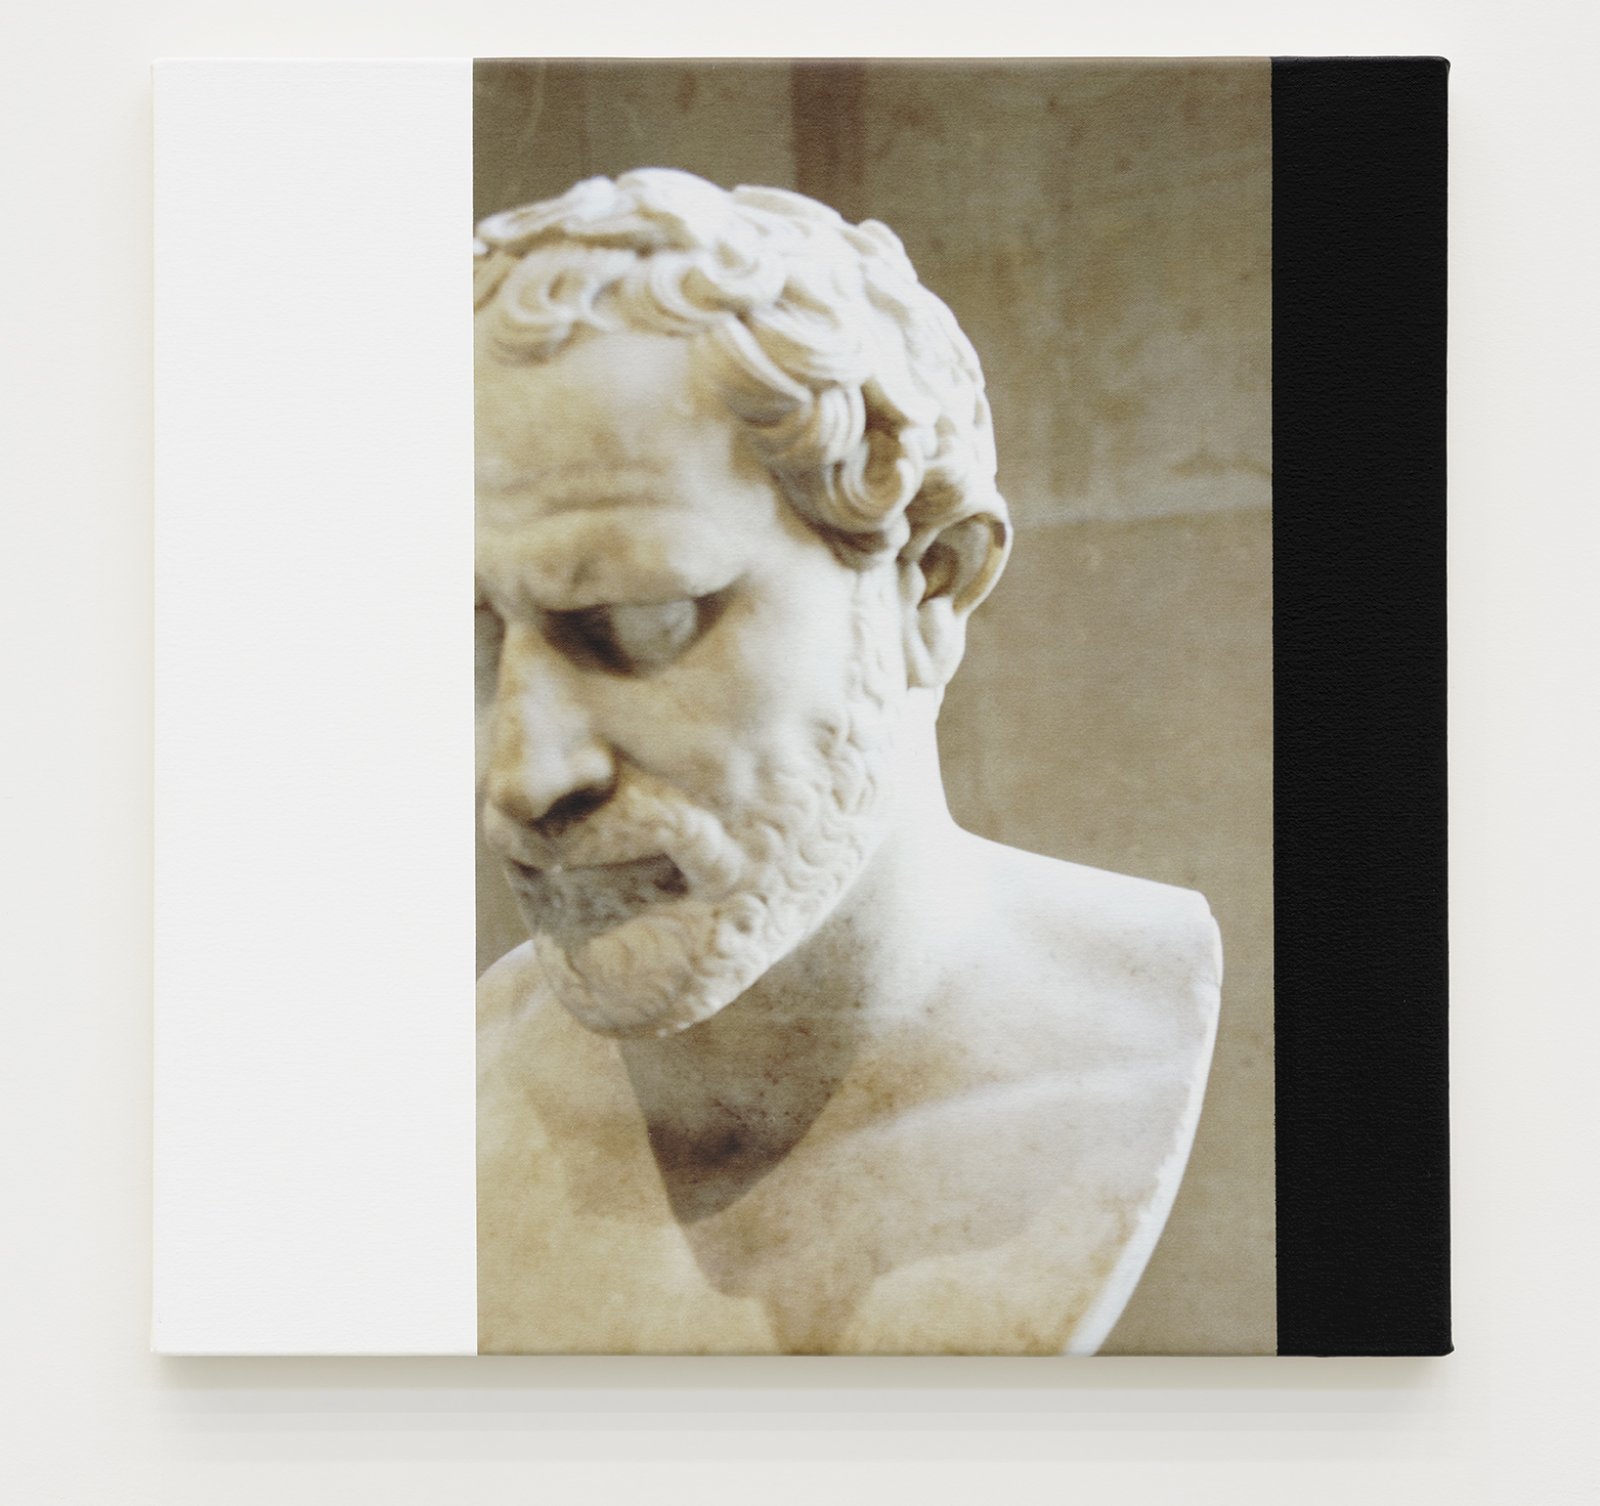 Ian Wallace, Roman Heads I–IV, 1990/2015, photolaminate with acrylic on canvas, 4 parts, each 24 x 24 in. (61 x 61 cm)